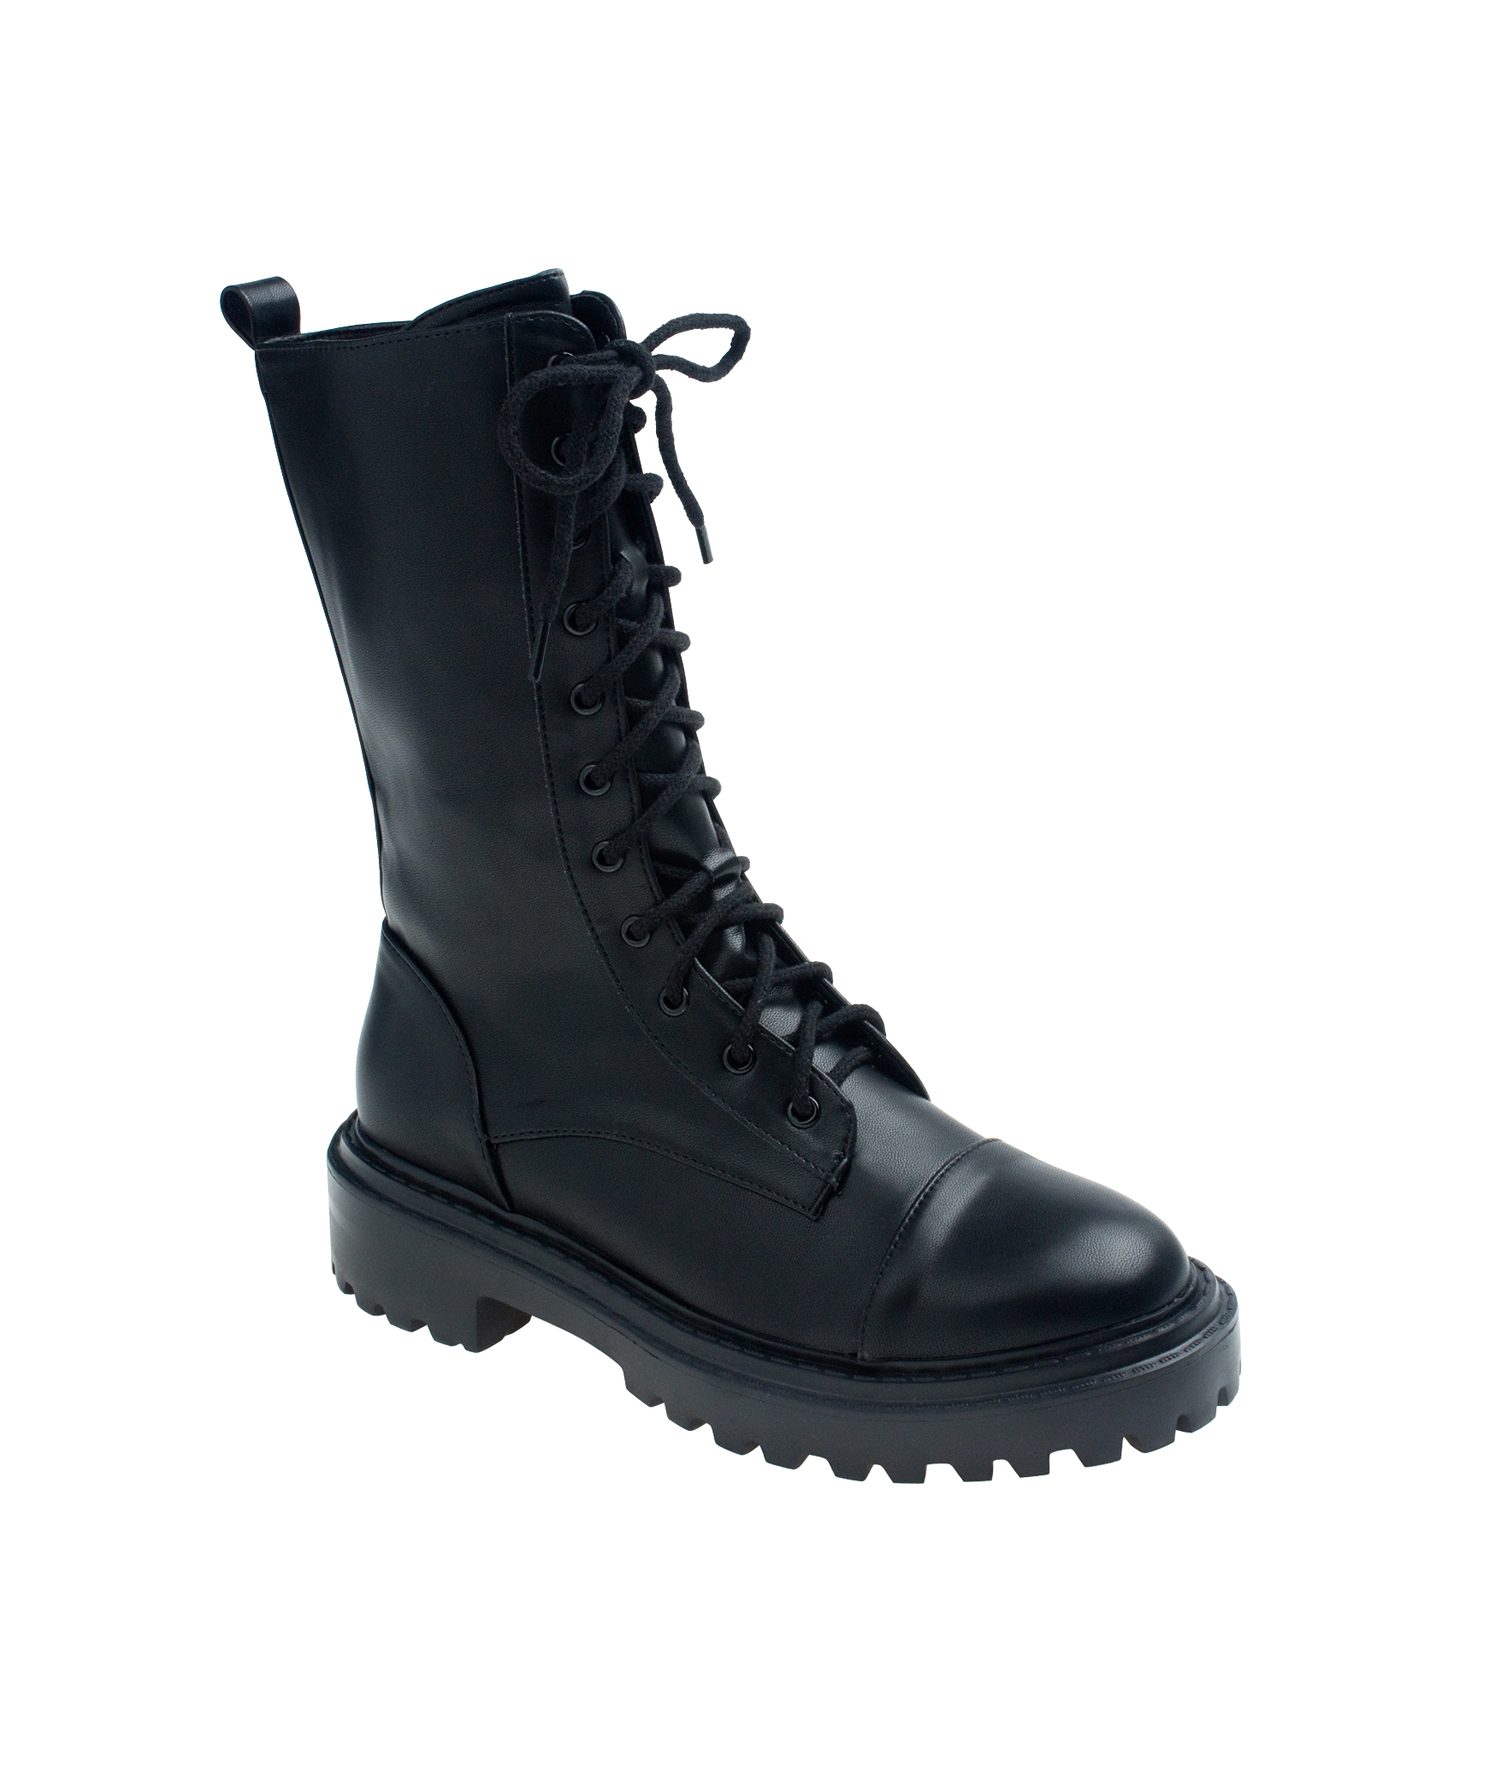 Governor Person in charge of sports game Power Black Cap-Toe Combat Boots - annakastleshoes.com